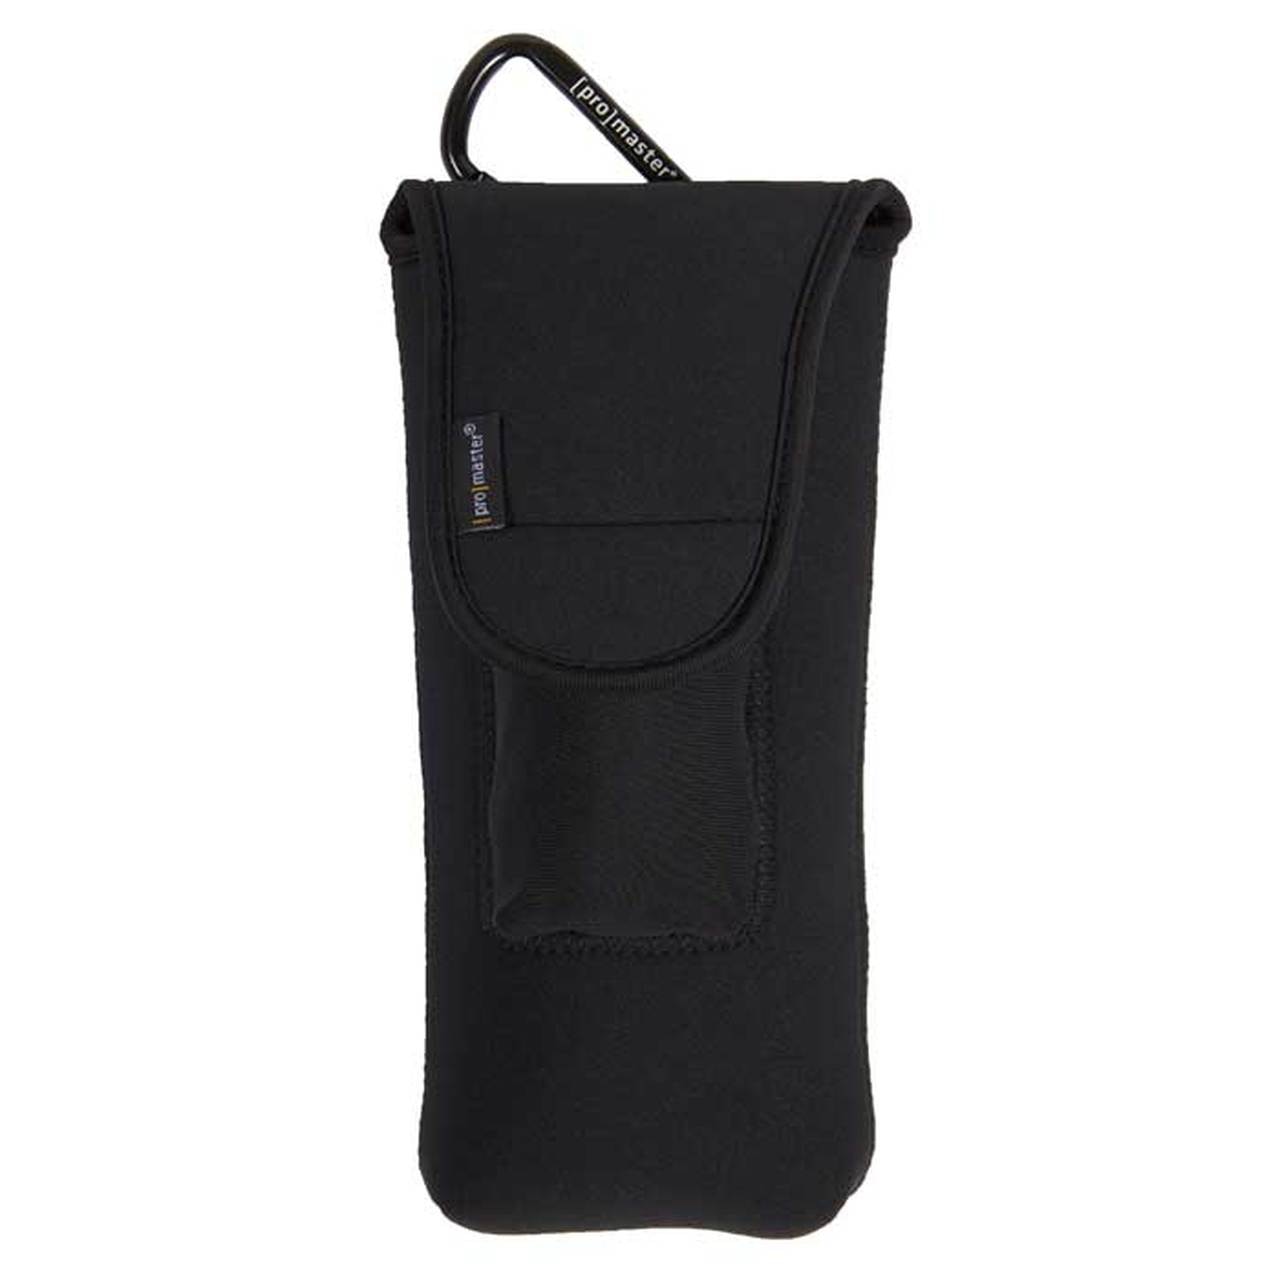 Promaster 7026 Neoprene Flash Pouch - Large